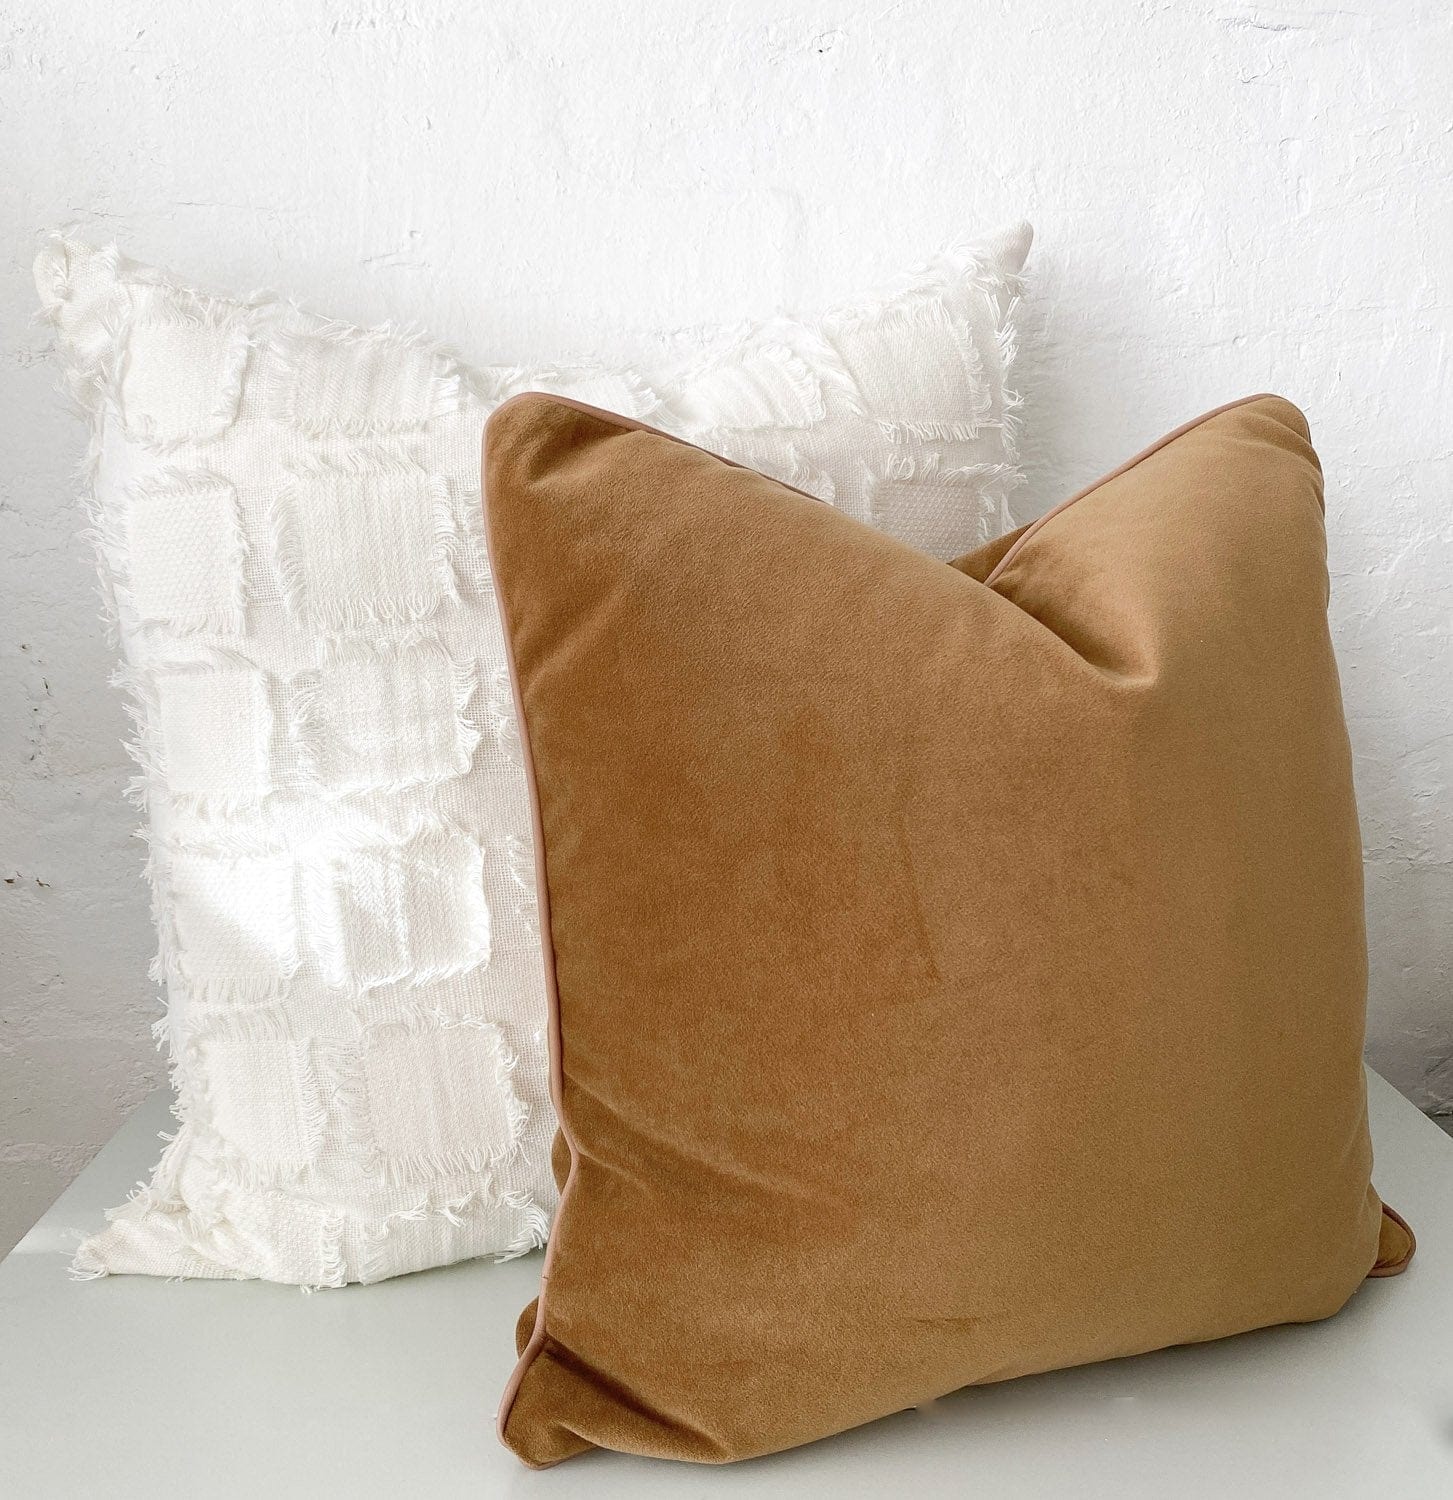 norsuHOME Cushions norsuHOME Cushion, Caramel Velvet with Blush Leather Piping (764509618267)